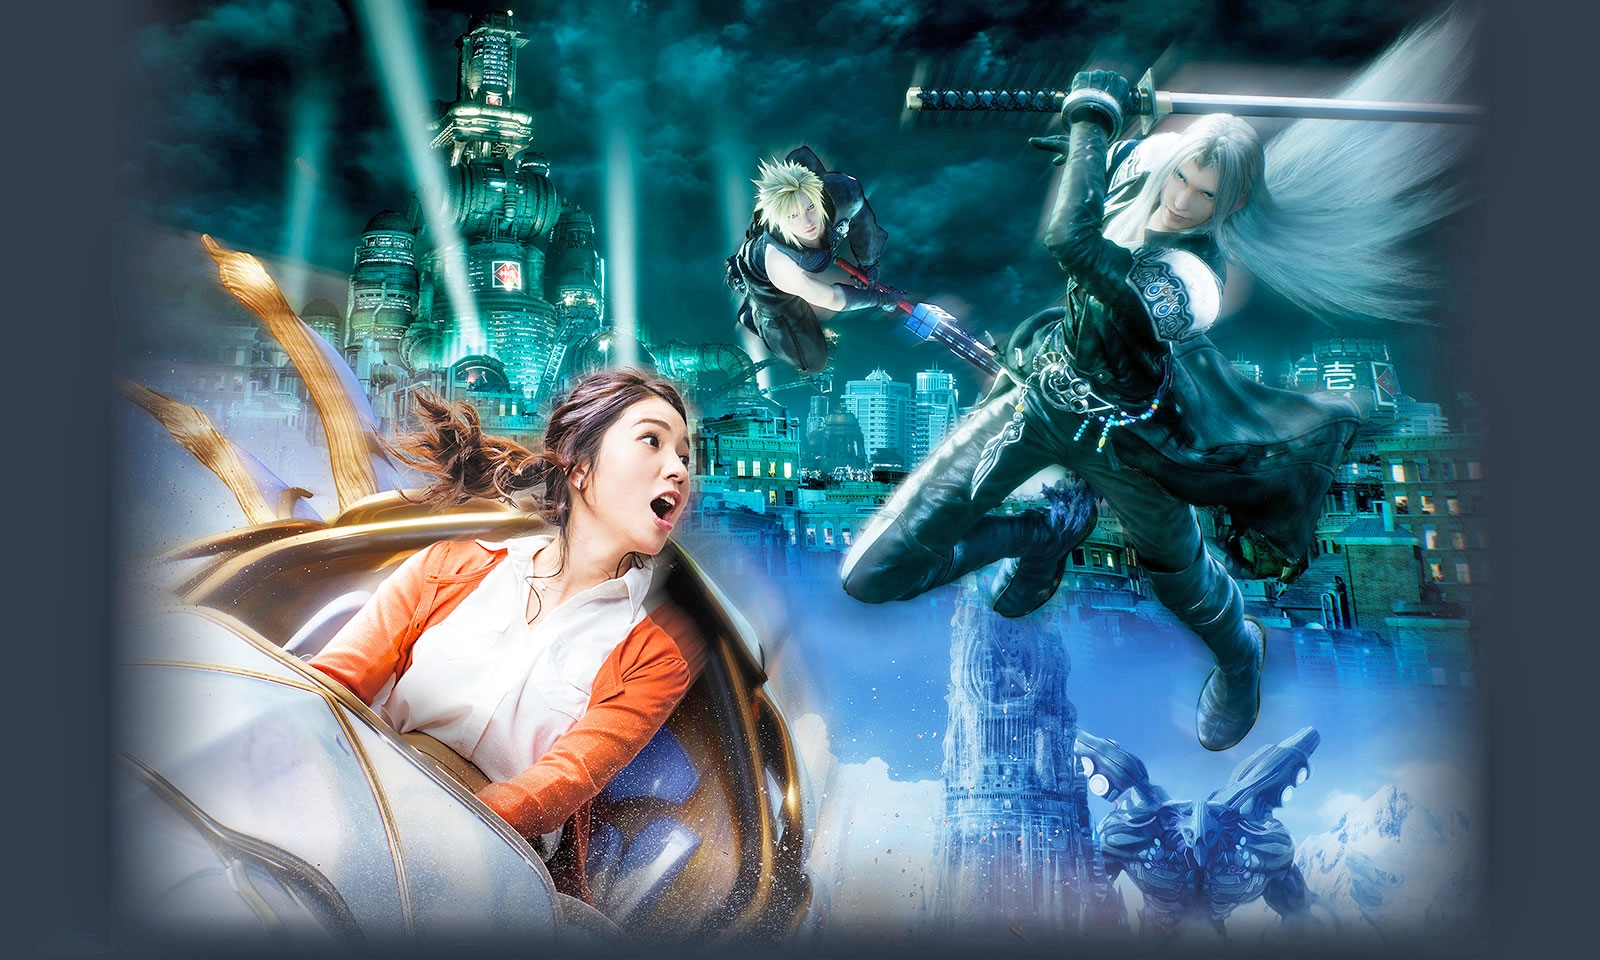 A 'Final Fantasy' VR coaster is coming to Universal Studios Japan | DeviceDaily.com